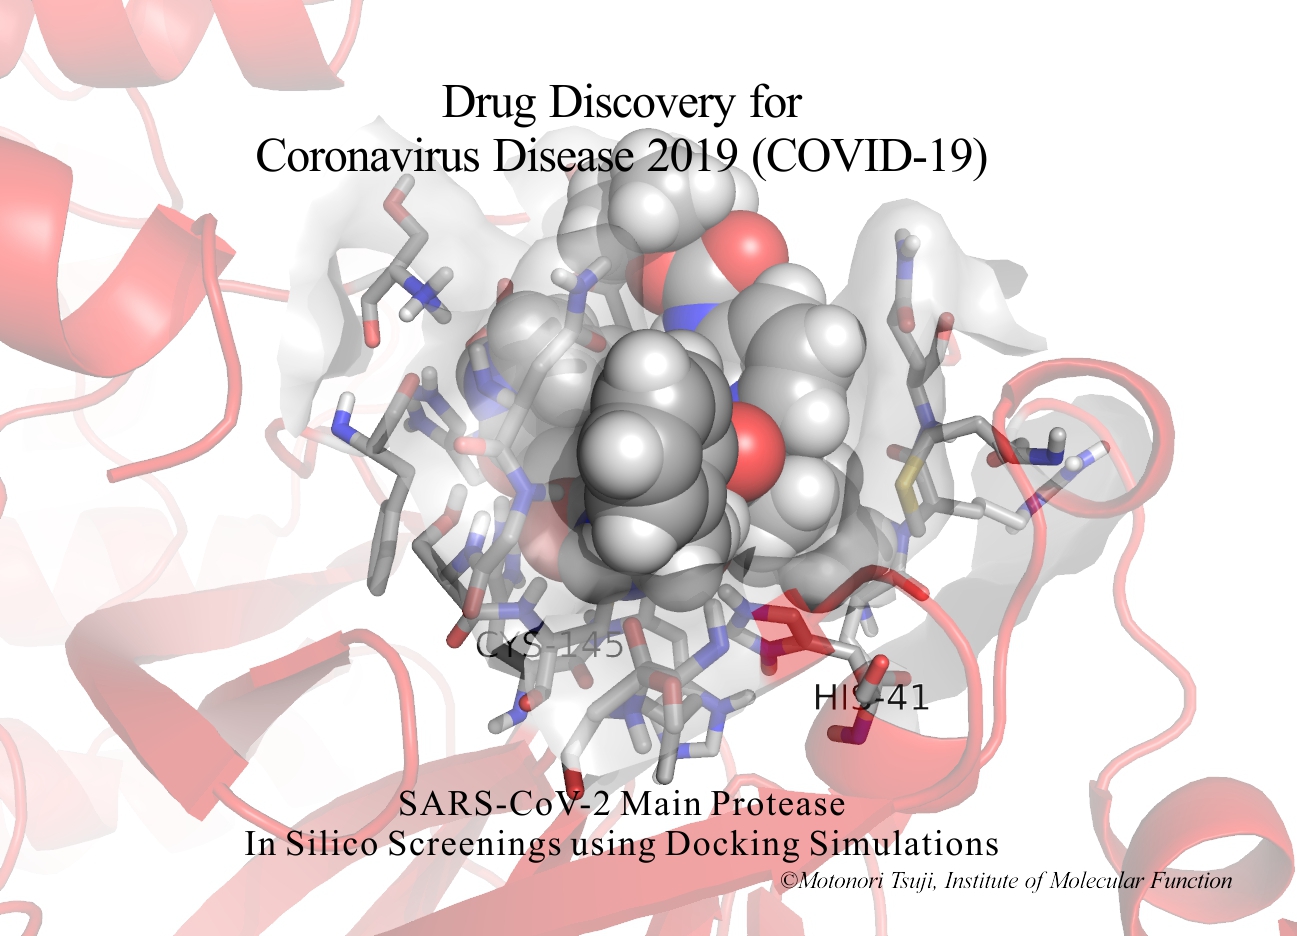 In silico screenings for SARS-CoV-2 (2019-nCoV) main protease